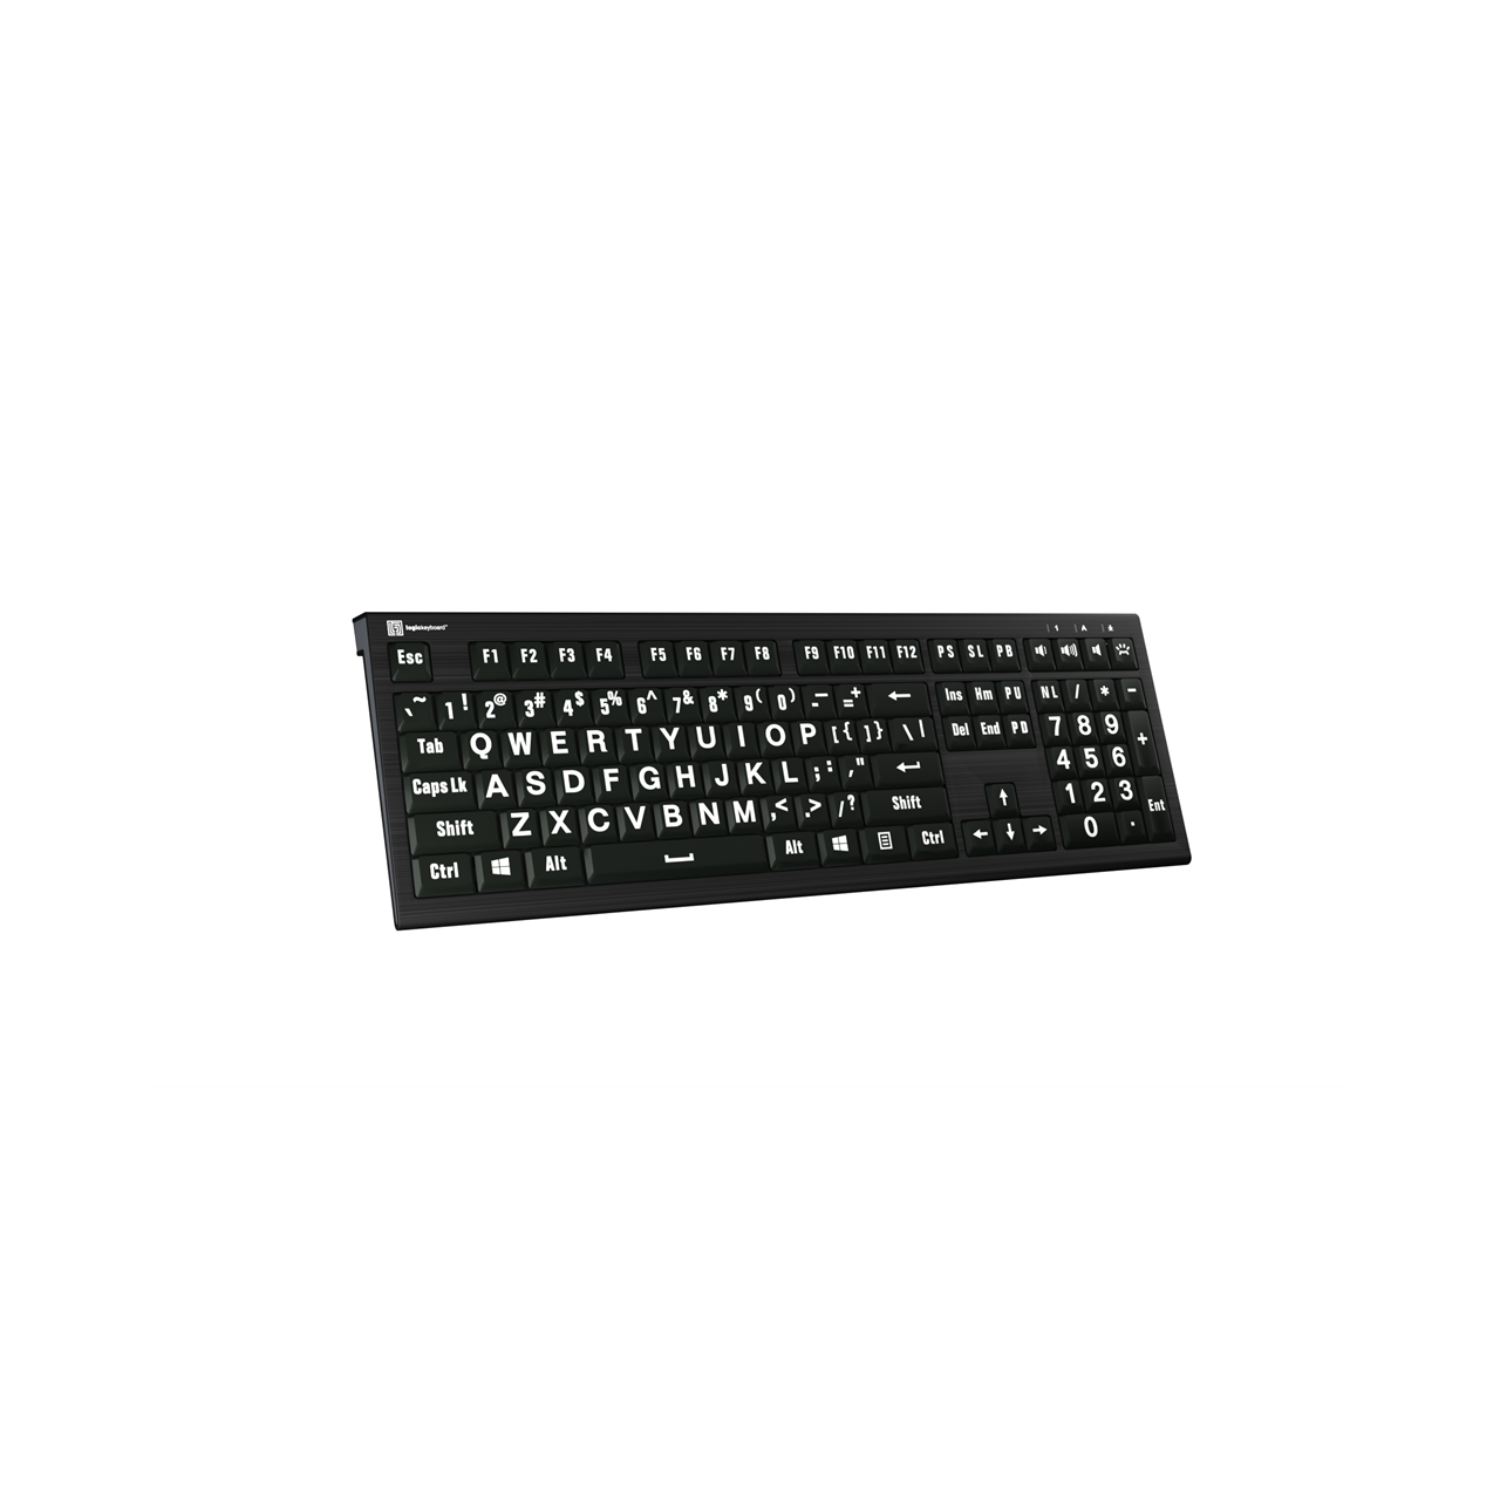 Angle Image of the Astra 2 largeprint backlit white on black keyboard from LogicKeyboard.